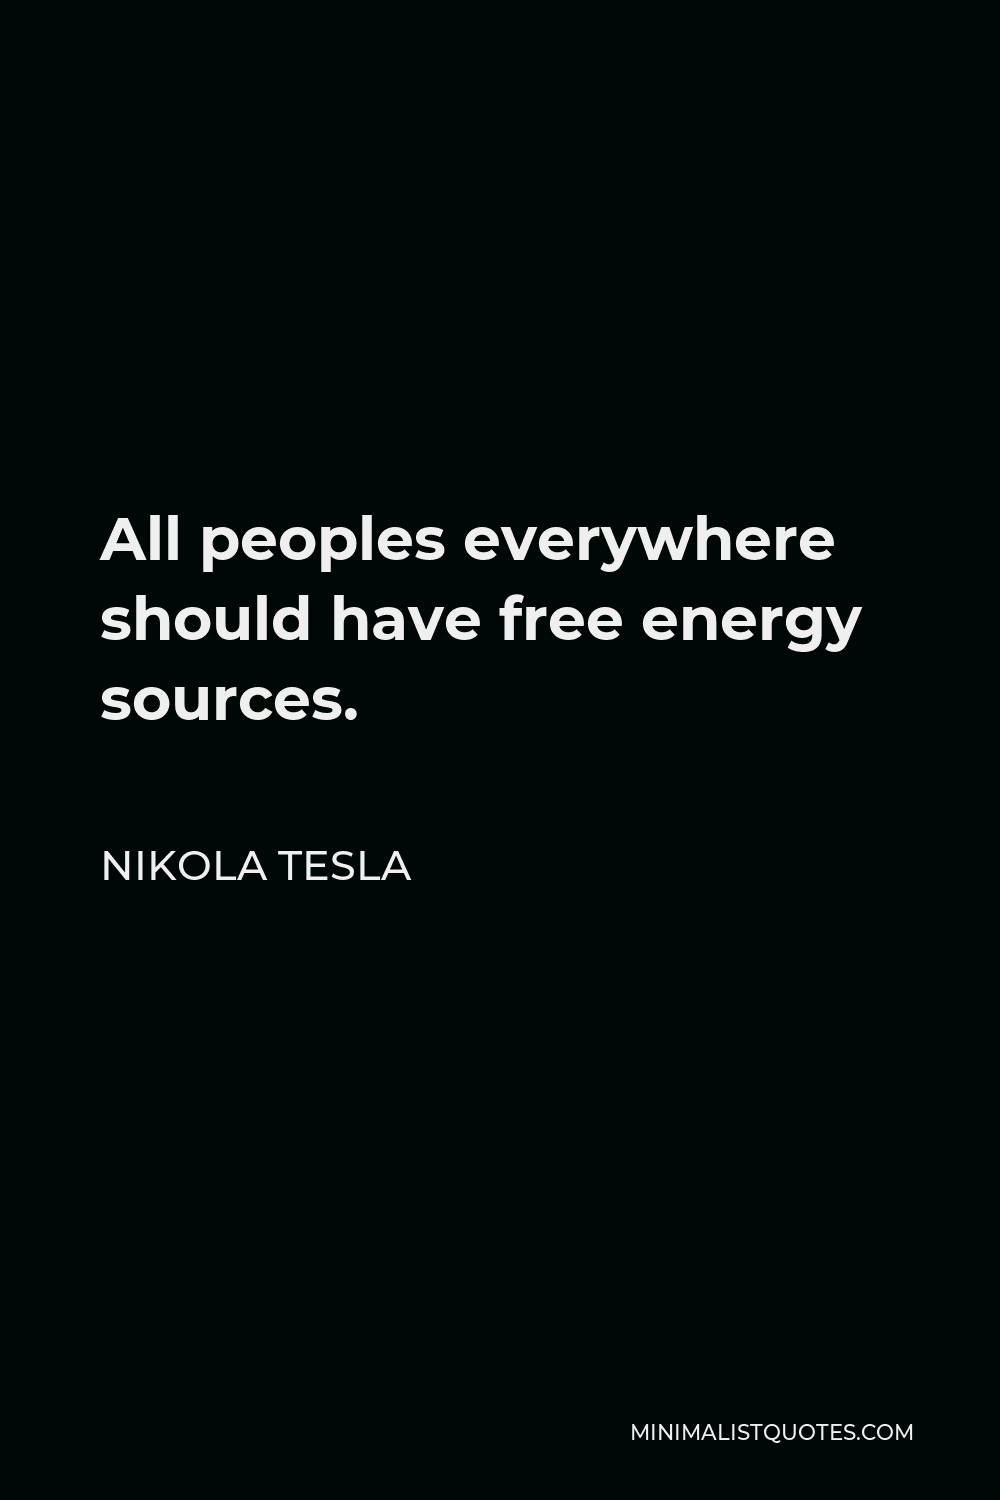 Nikola Tesla Quote - All peoples everywhere should have free energy sources.